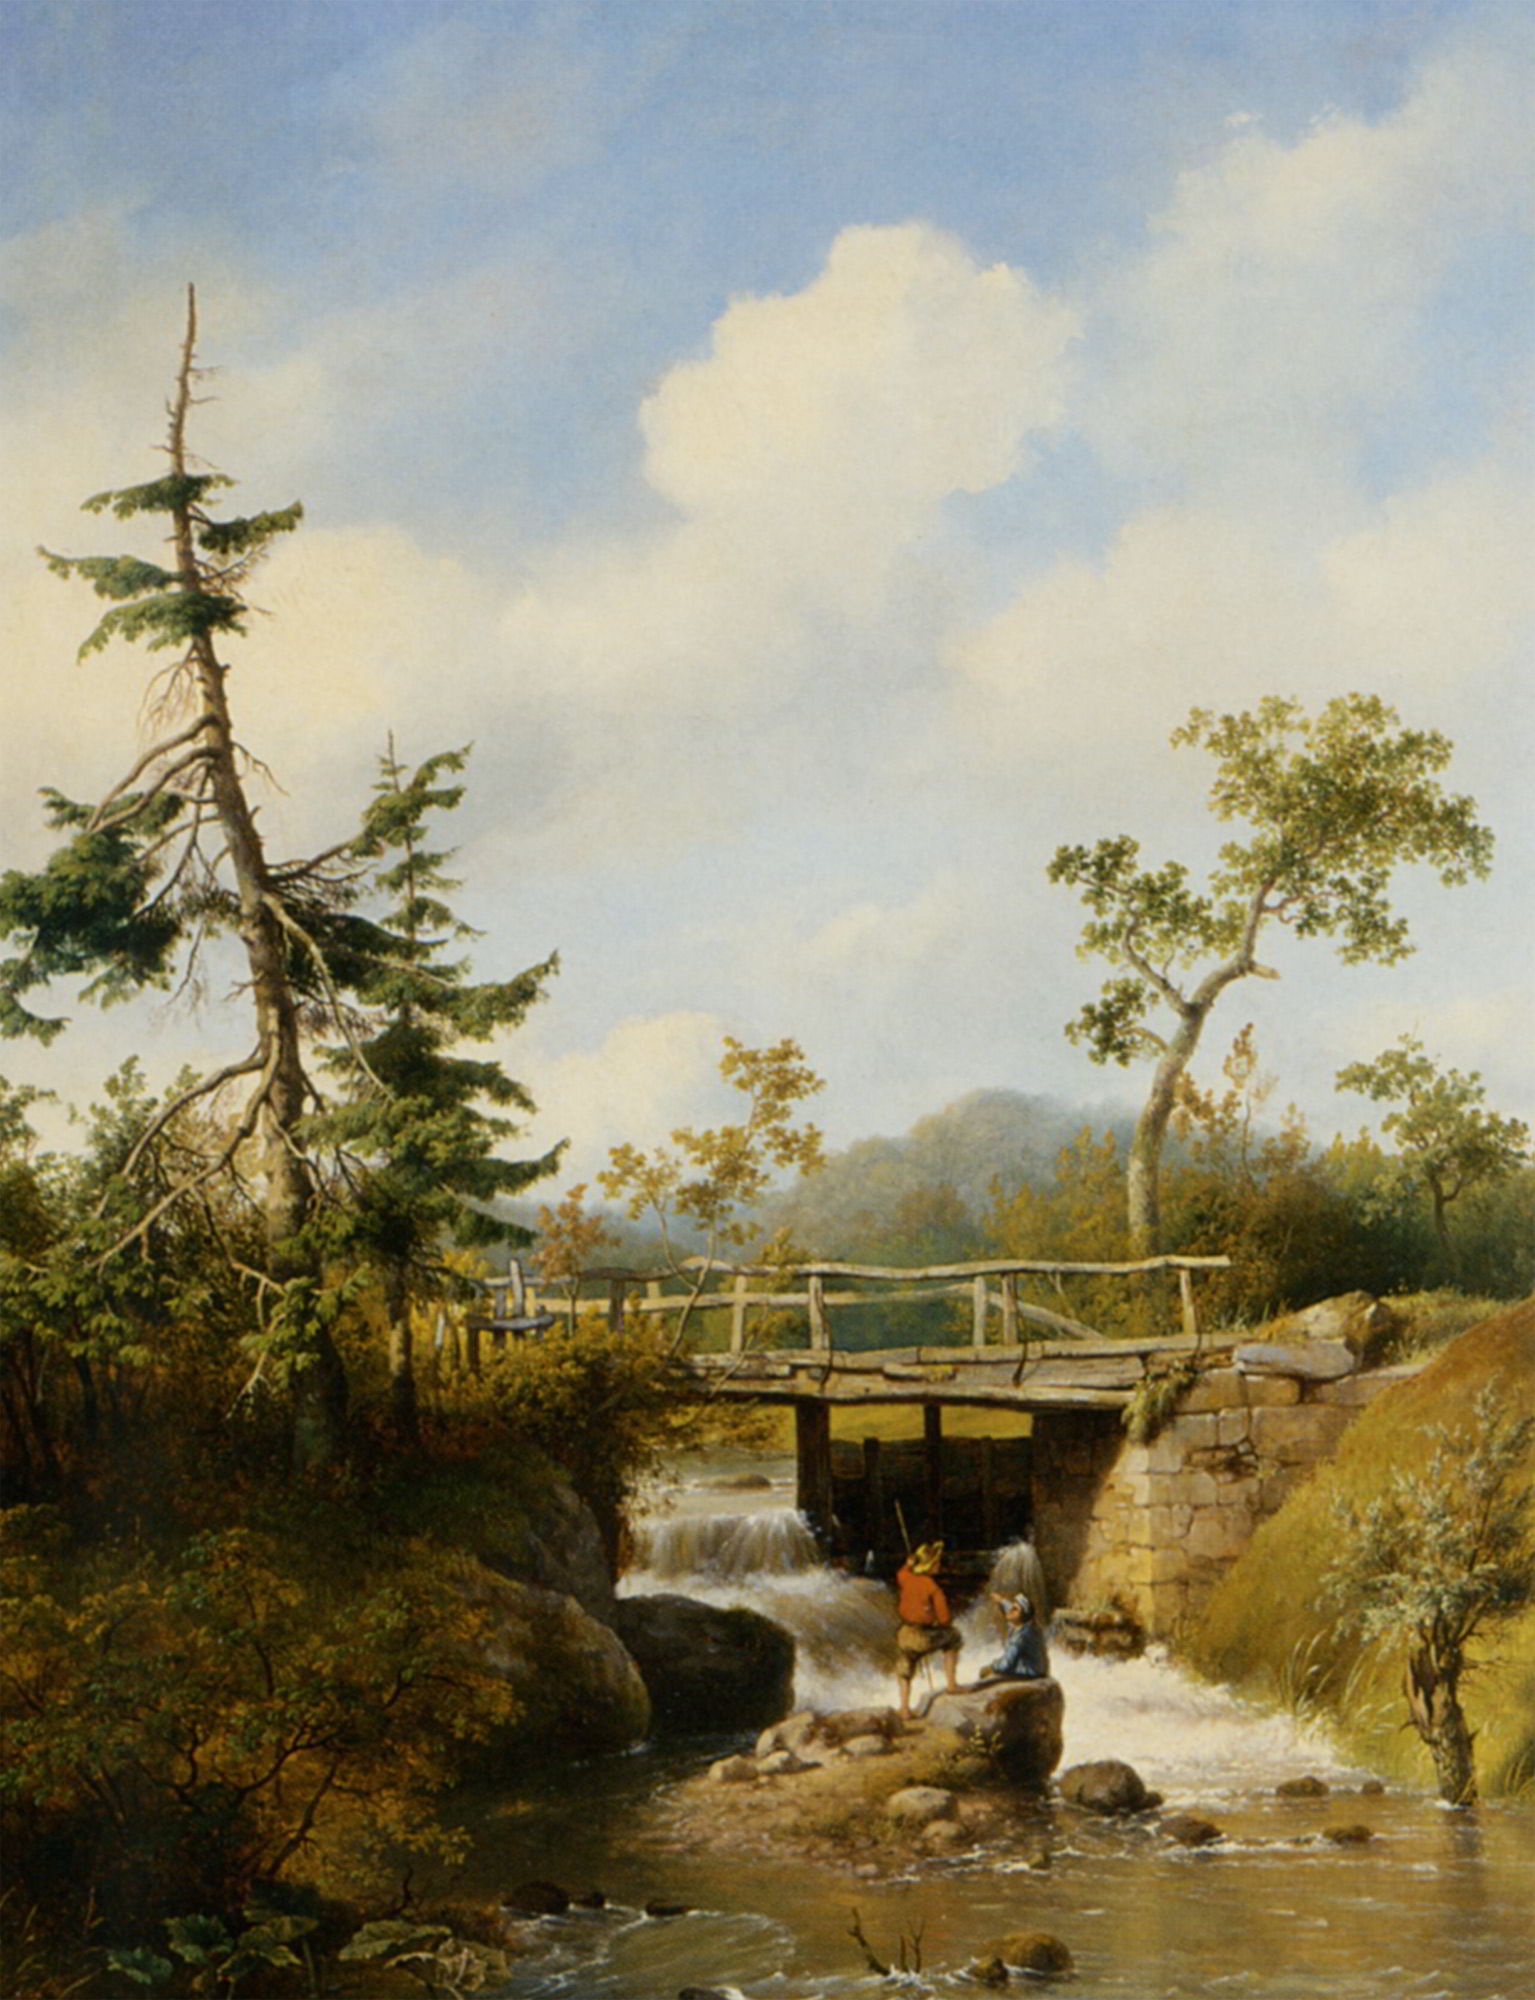 A Forest View with Figures by a Stream by Hendrikus van den Sande Bakhuyzen